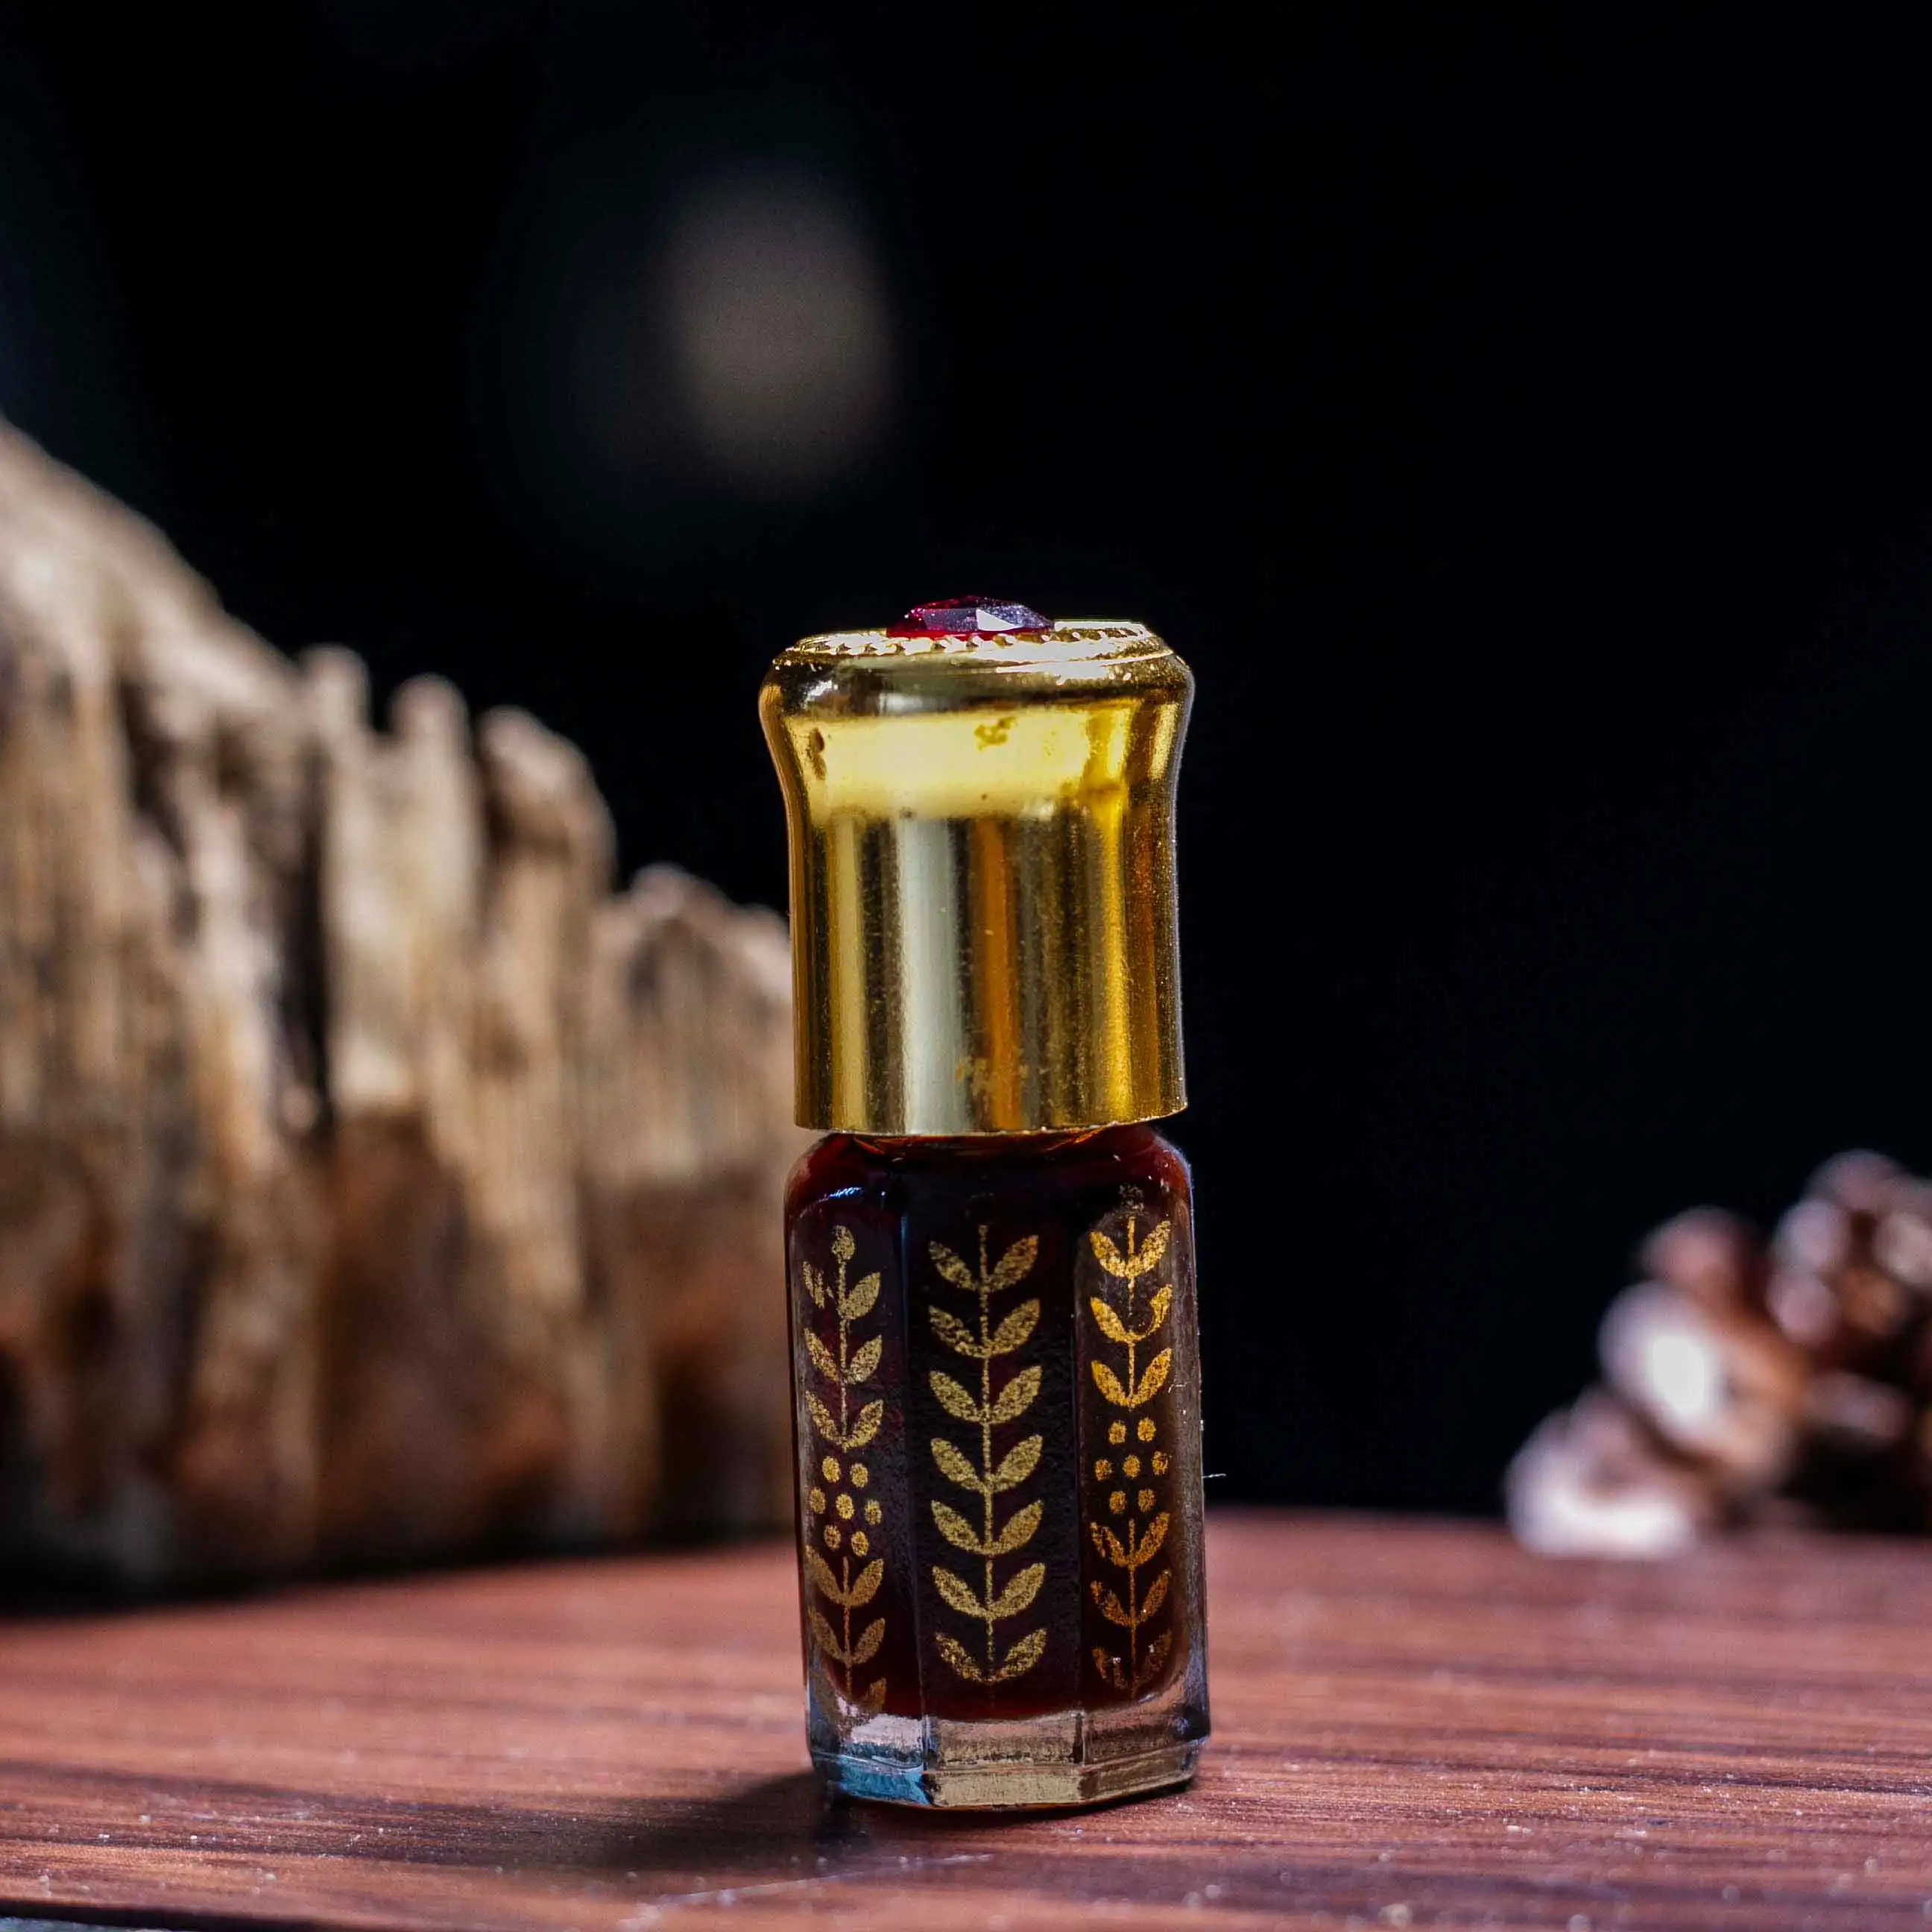 Oud Oil 100% Pure - Eastern Cambodian - 100% Pure Oud, No